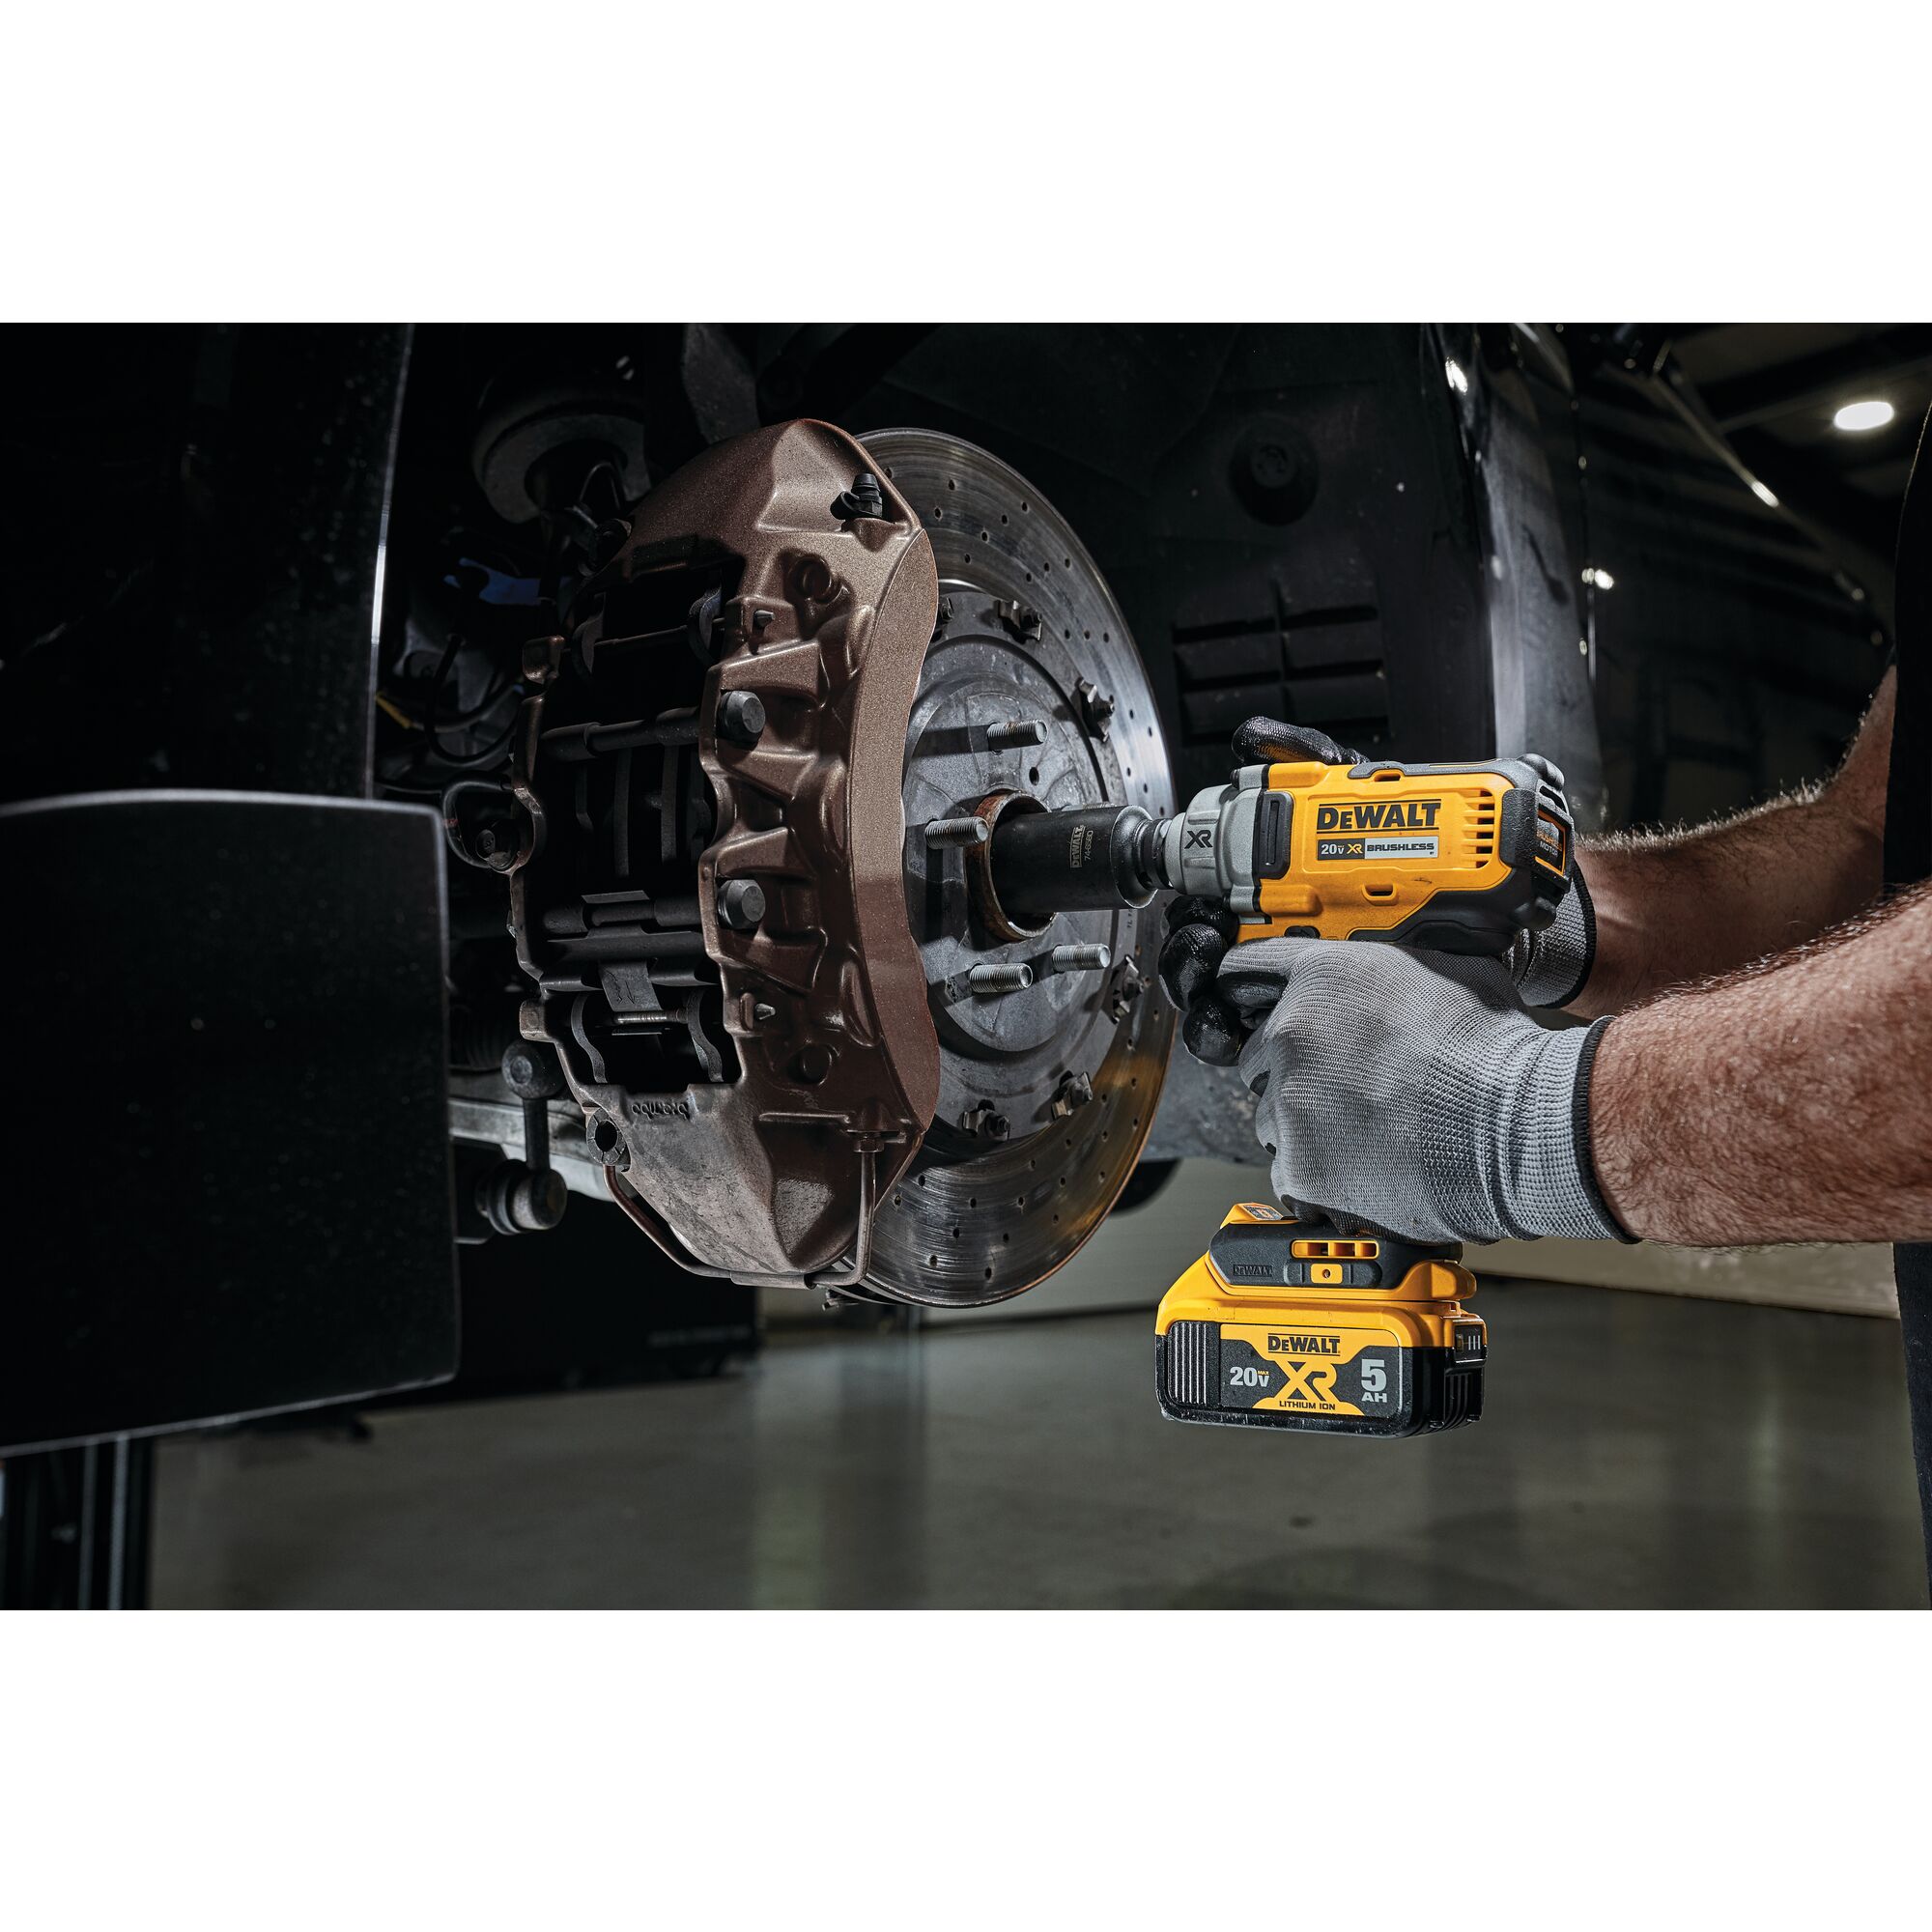 XR Impact Speed DEWALT (Bare Variable Tool) Brushless Wrench Drive Impact 1/2-in Cordless at the in department Wrenches